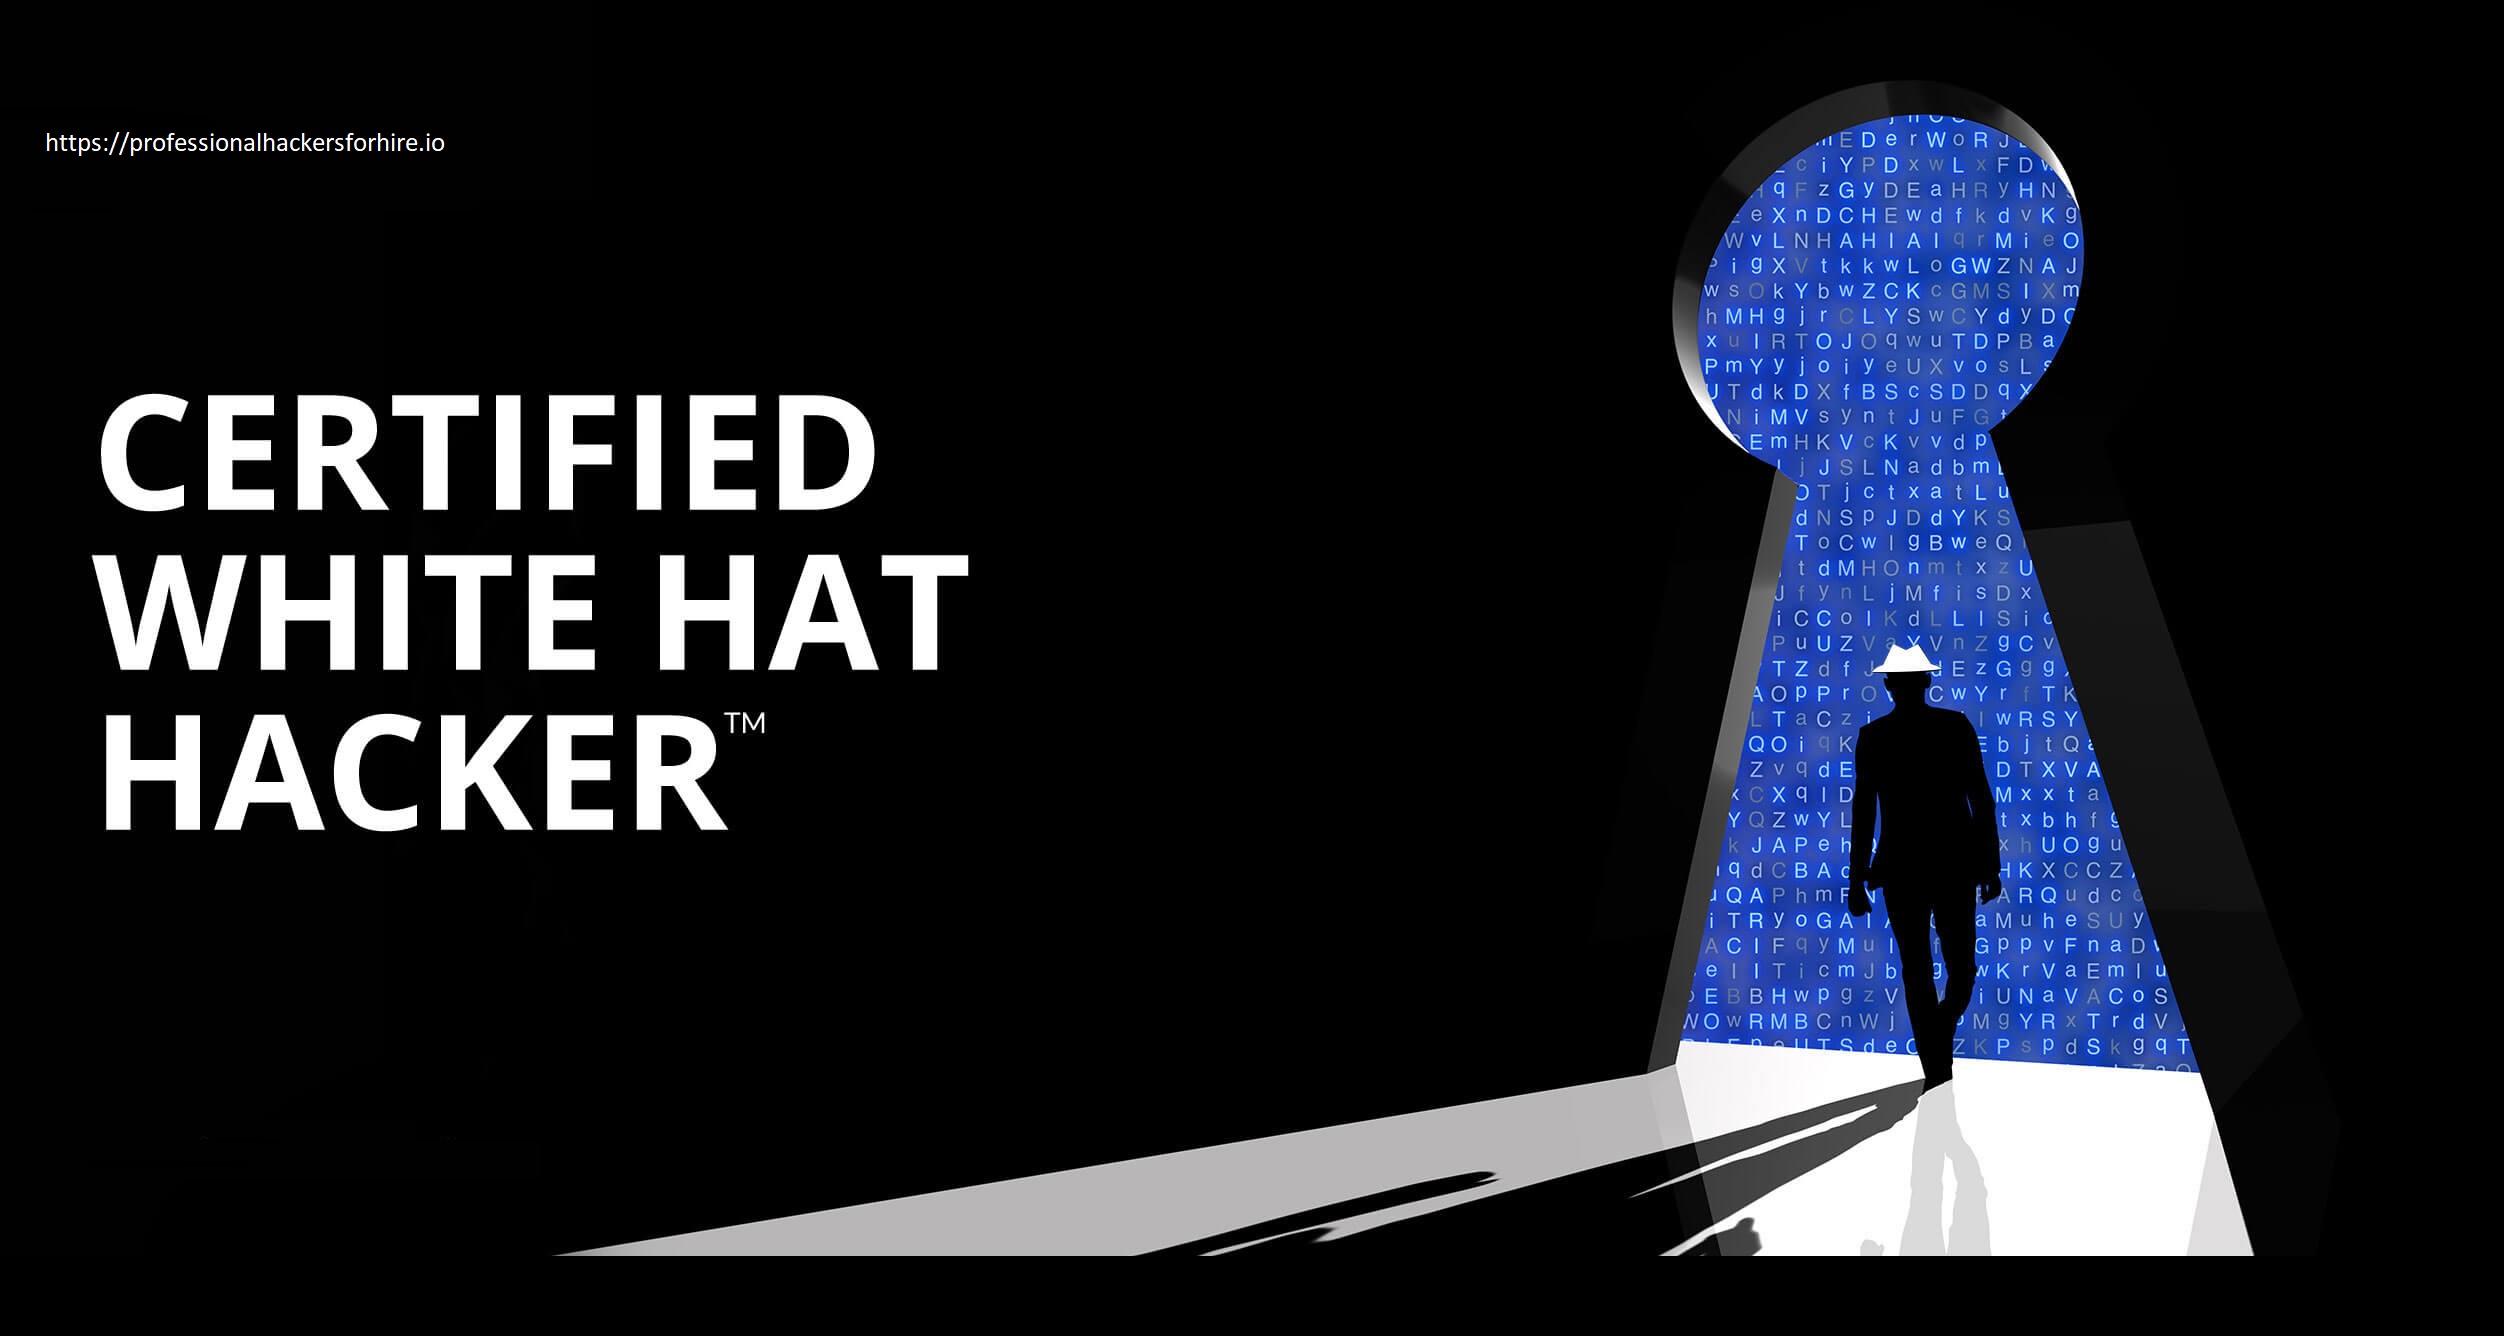 Black hat hackers for hire